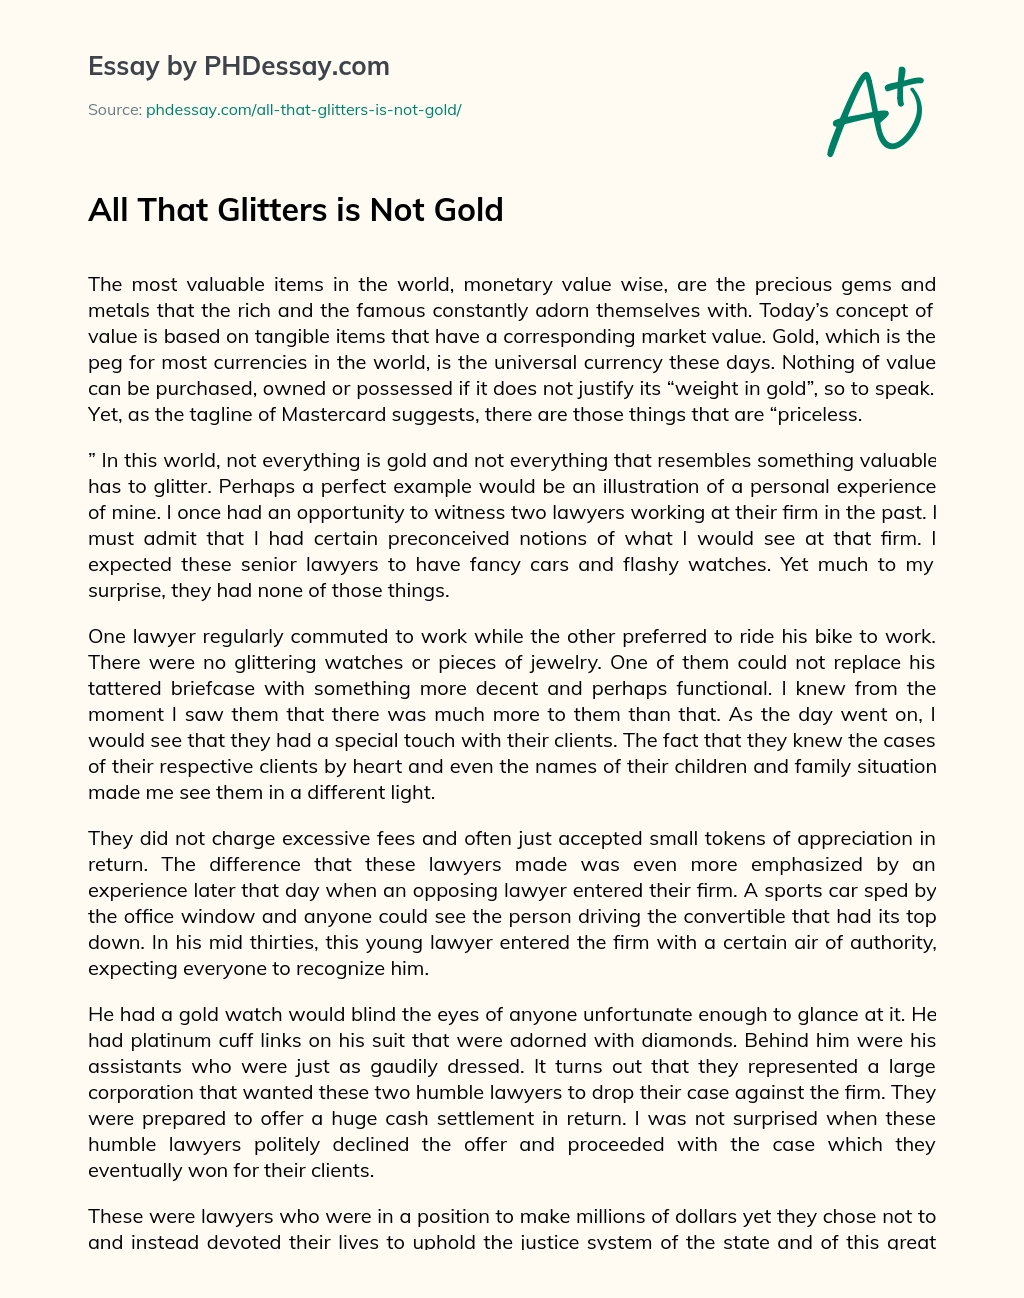 All That Glitters is Not Gold essay